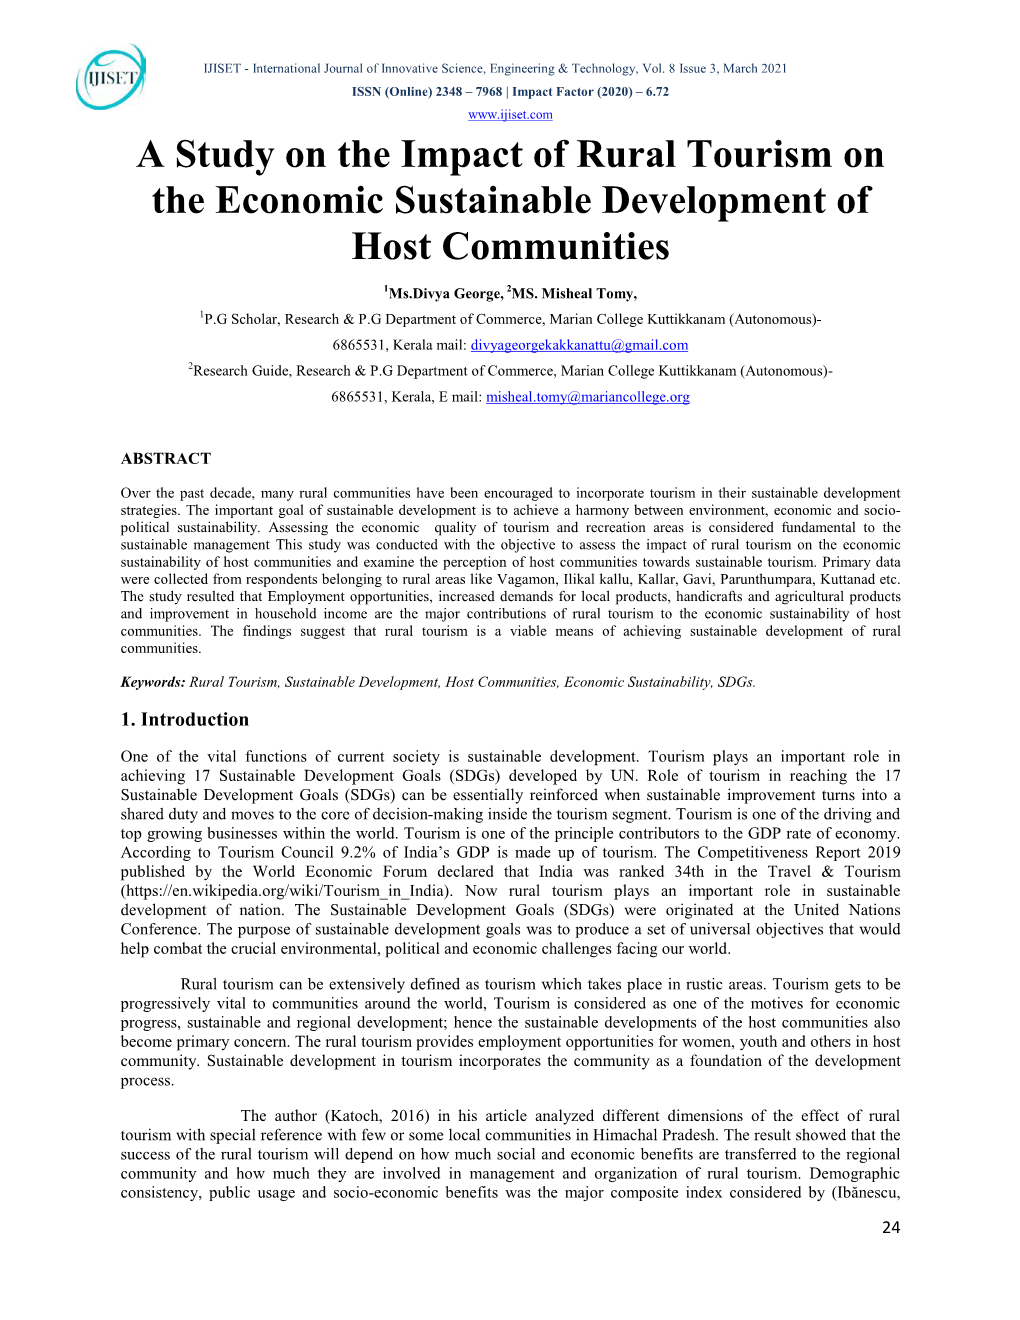 A Study on the Impact of Rural Tourism on the Economic Sustainable Development of Host Communities